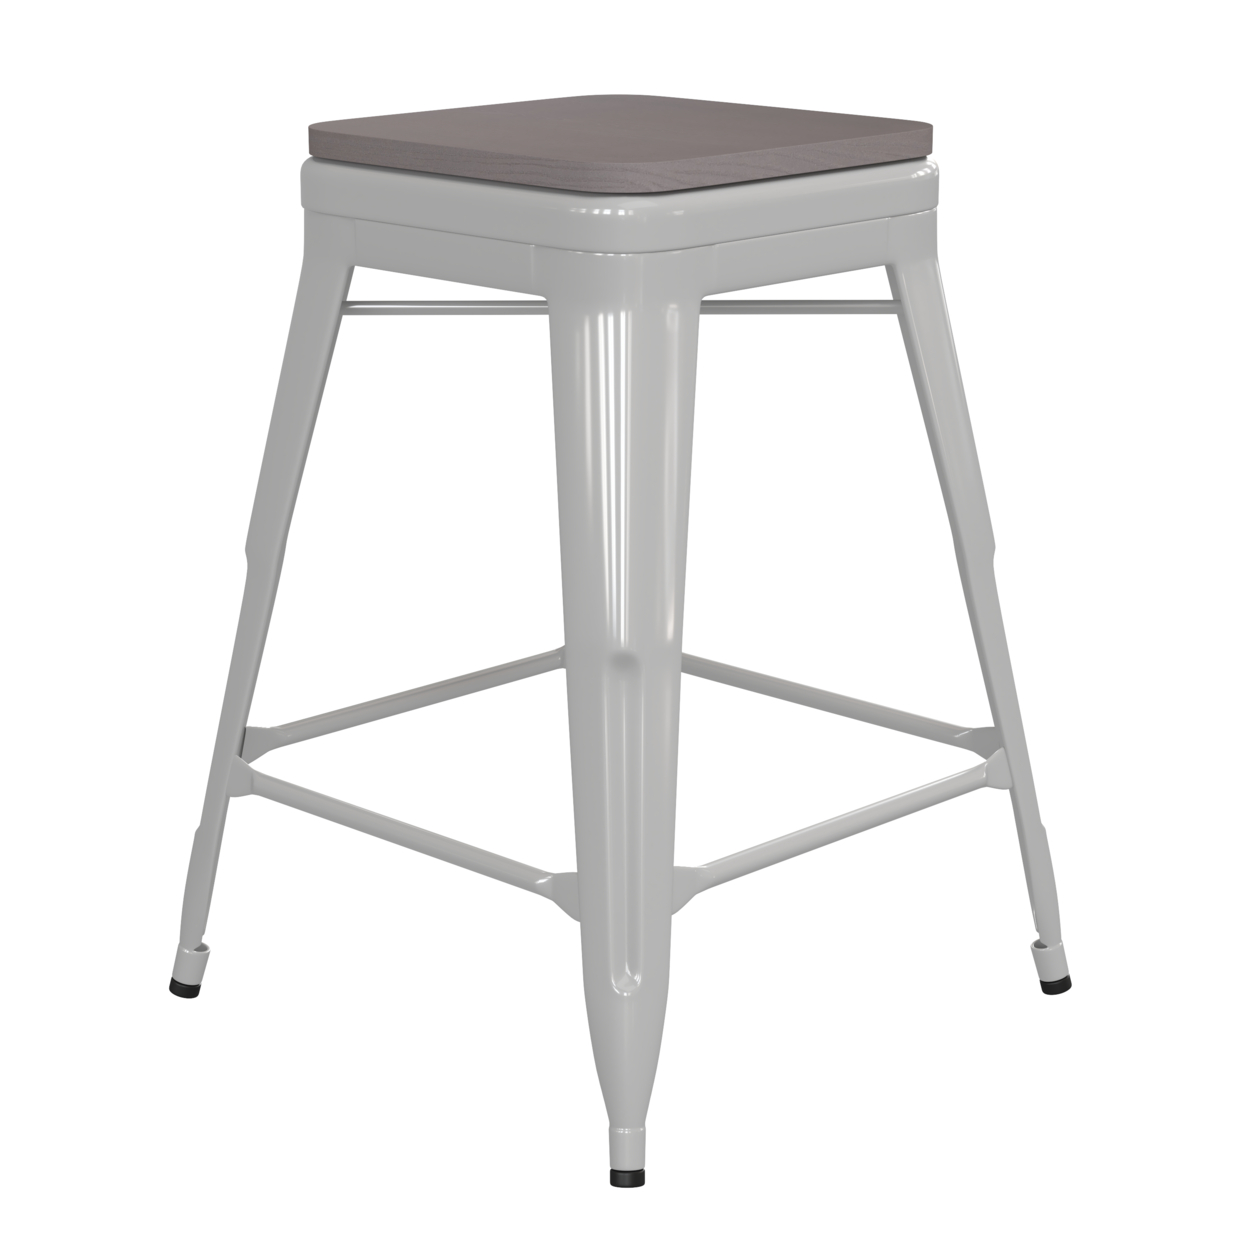 24 Inch Metal Stool, Thick Wood Seat, Light Gray